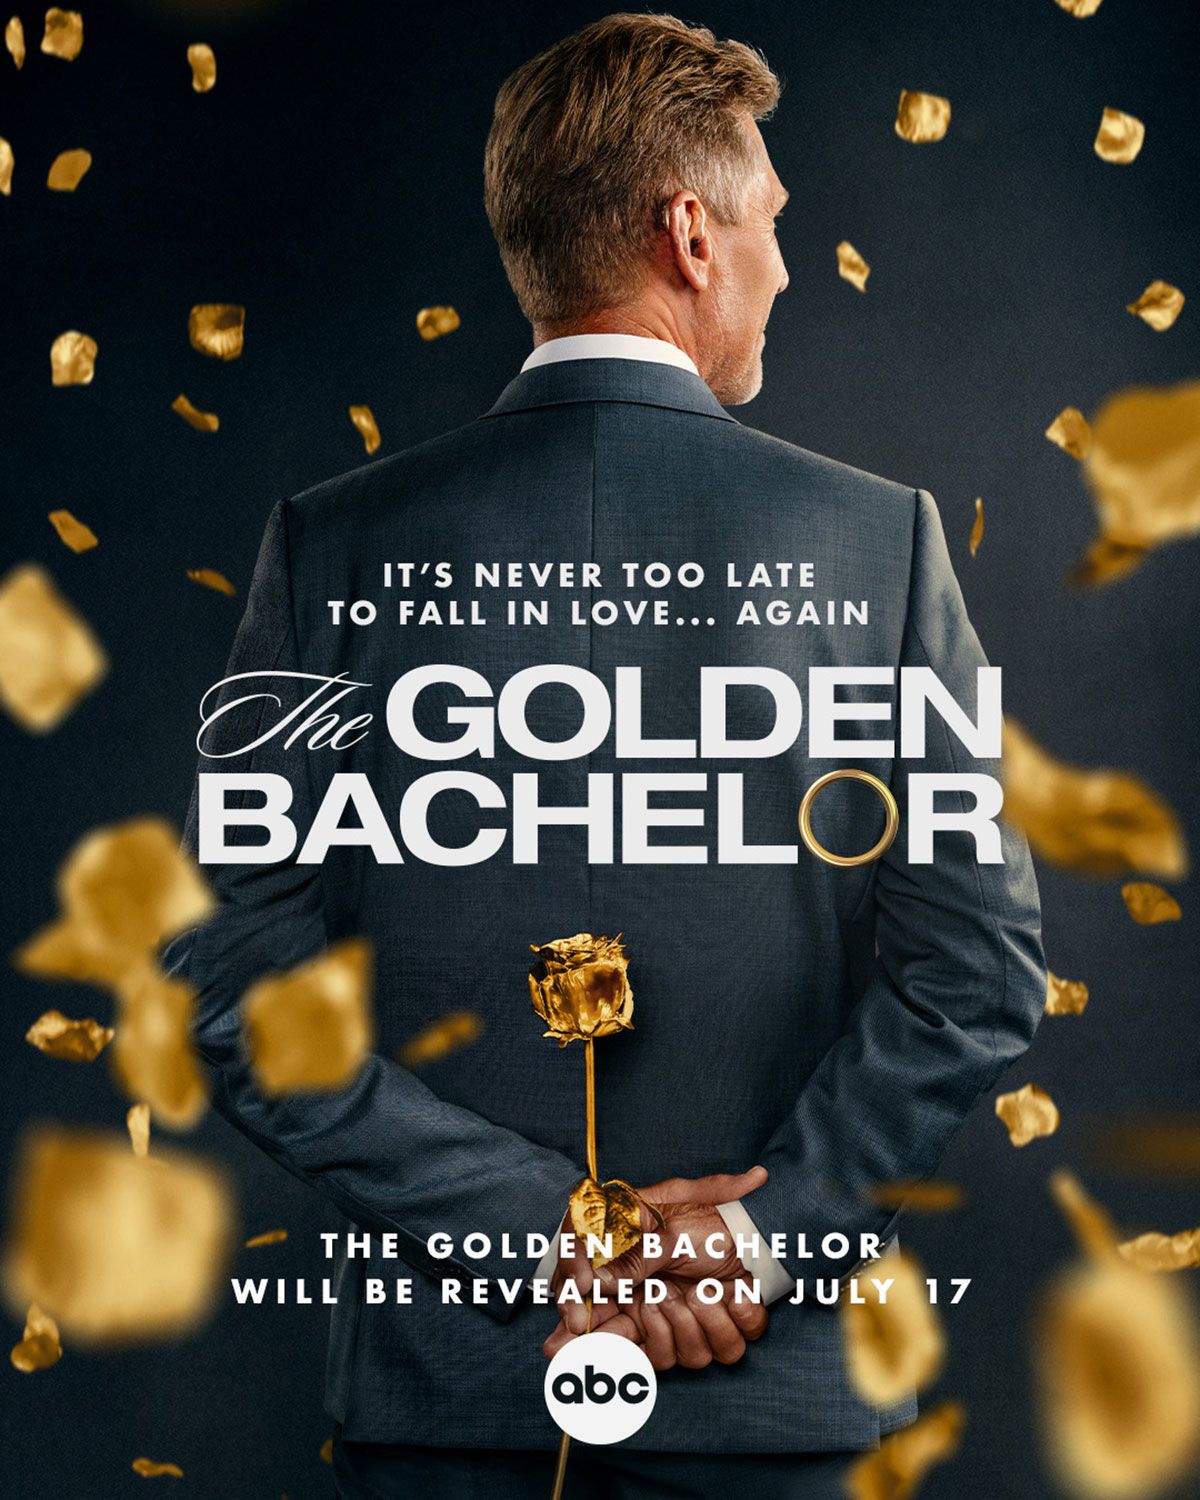 Catch a Glimpse of 'The Golden Bachelor' in First Poster